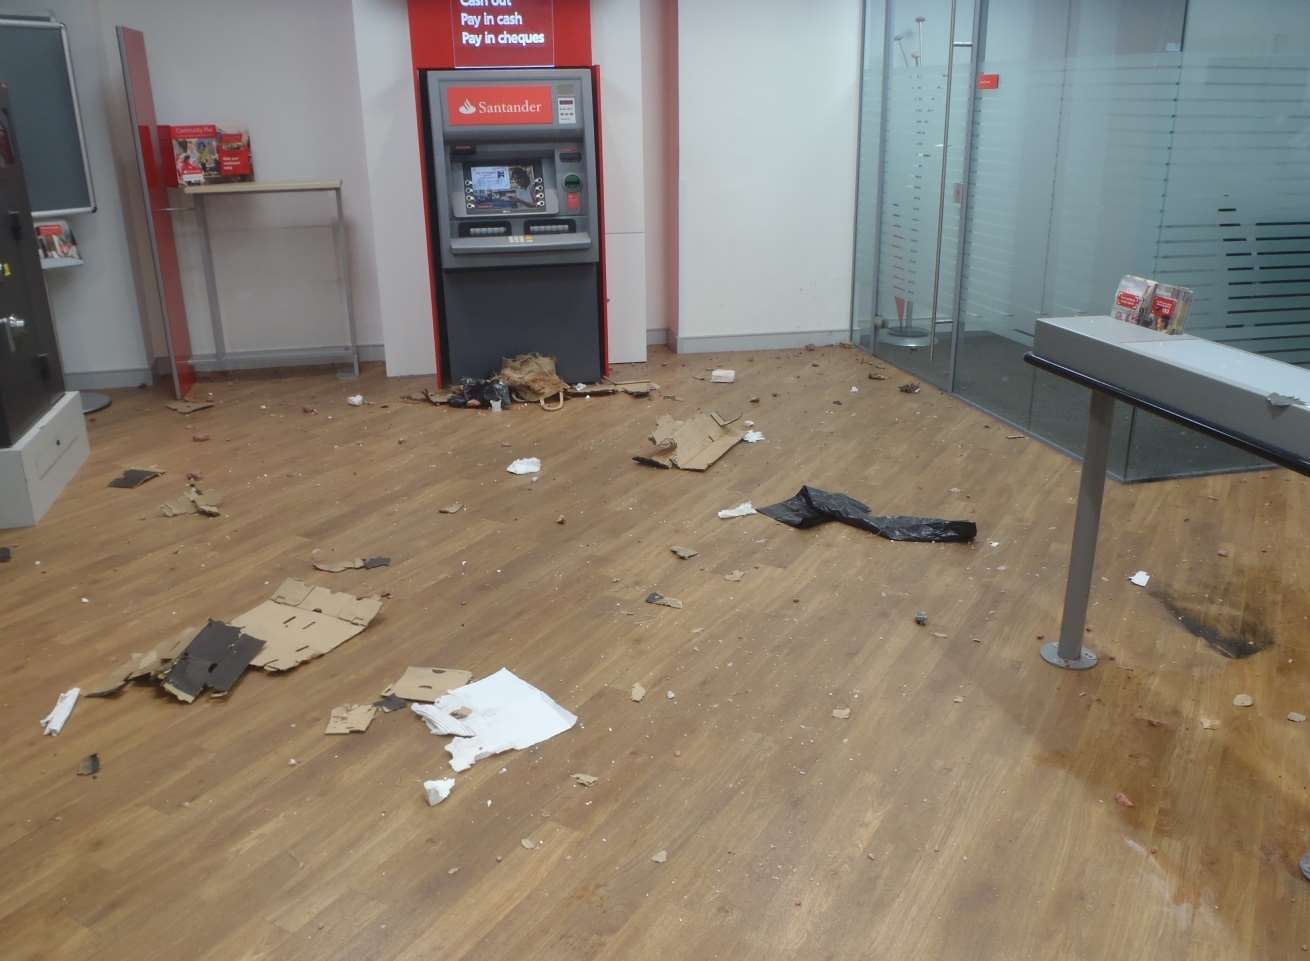 The scene in the bank after the device was exploded. Picture: Kent Police